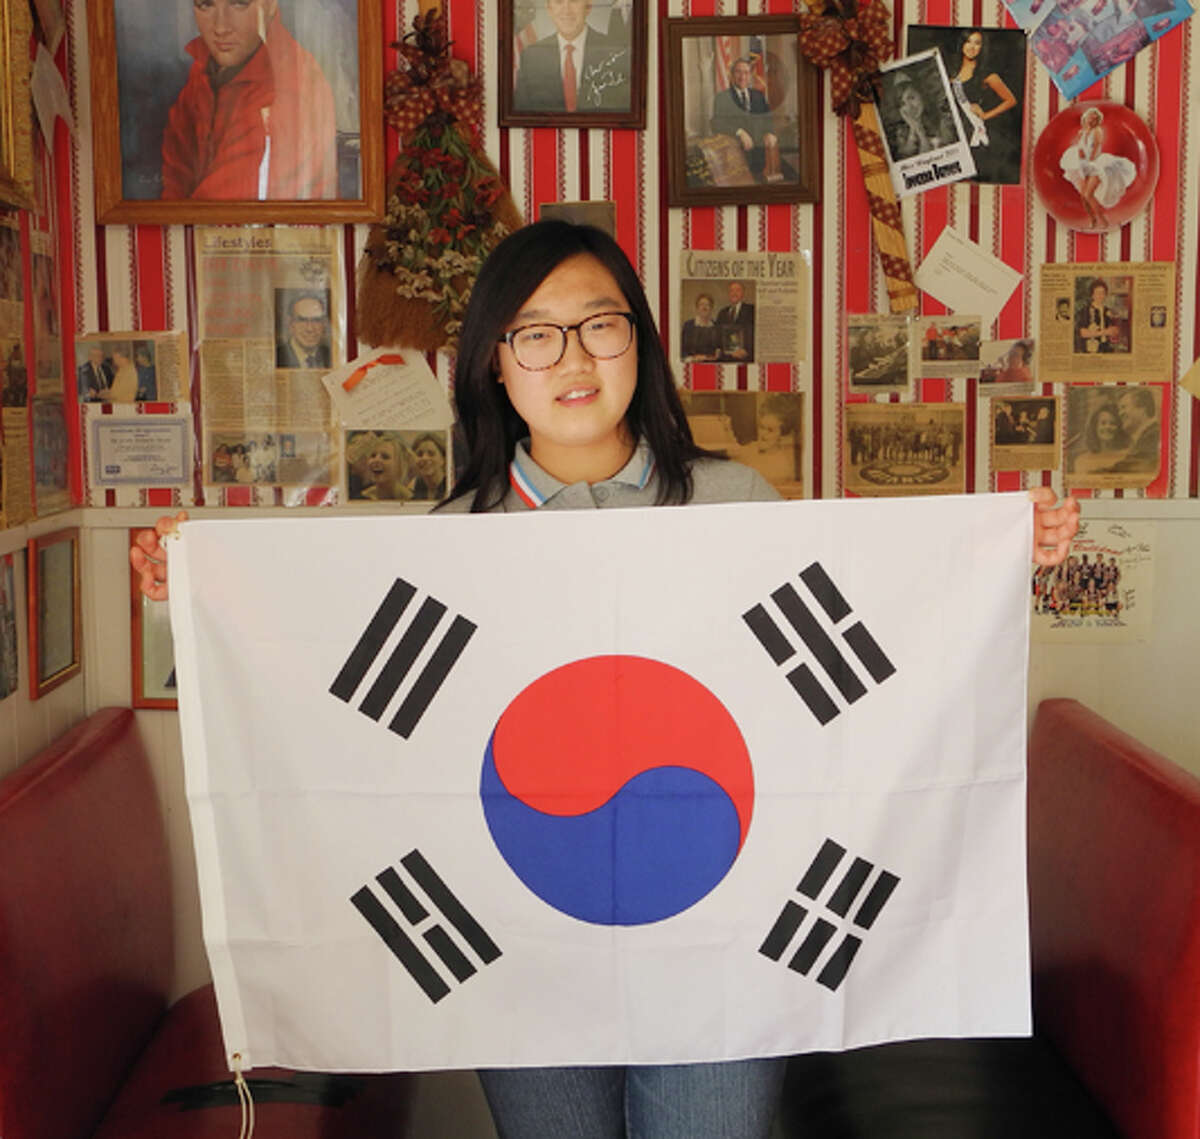 Surrounded by American cultural icons at the Roaring 50s café in Plainview, South Korean exchange student Haeun Kim holds up her country’s flag. The yingyang symbol stands for perfect balance, and each of the four trigrams in the corners have a different meaning.